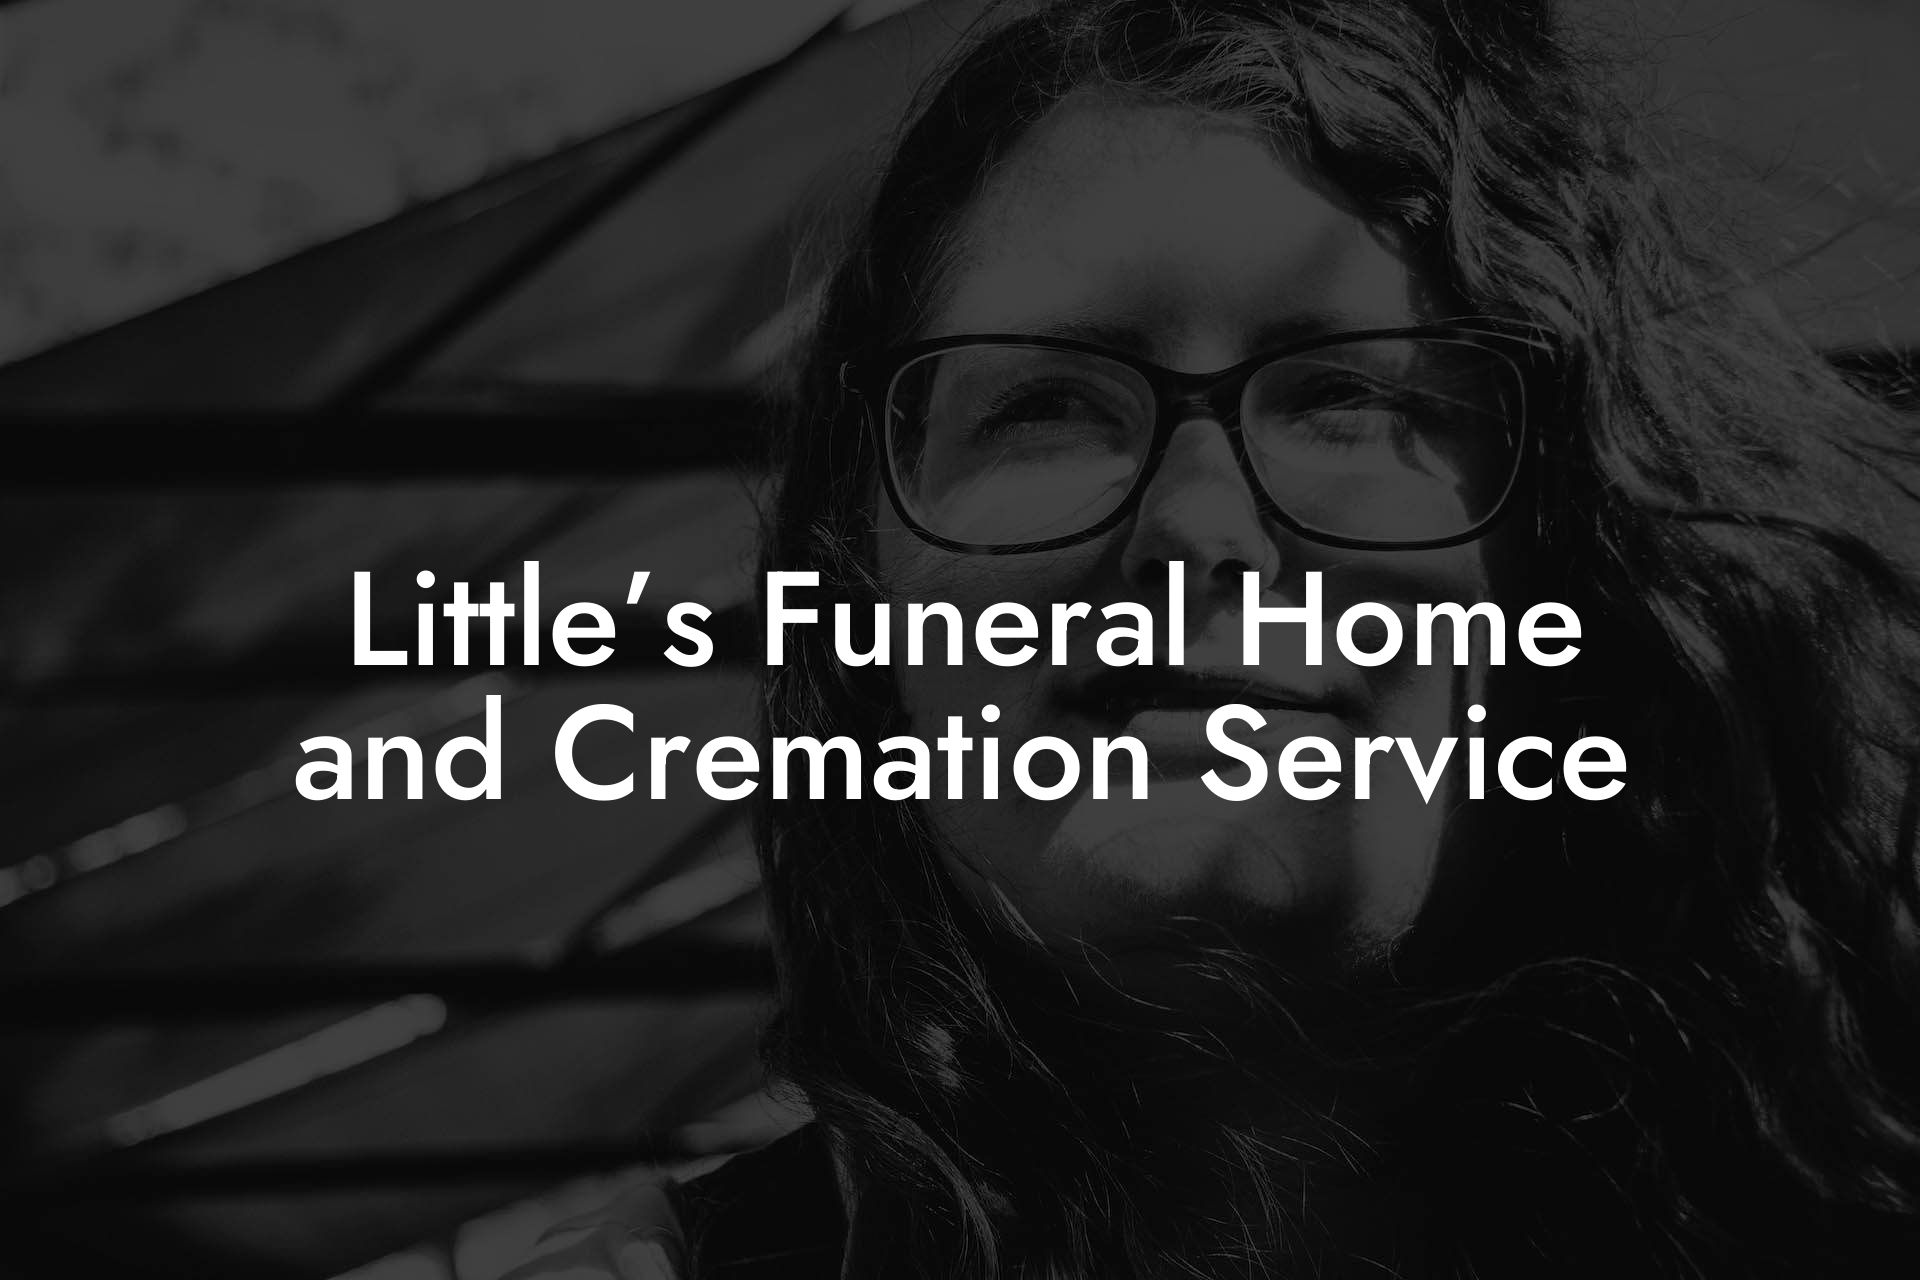 Little’s Funeral Home and Cremation Service